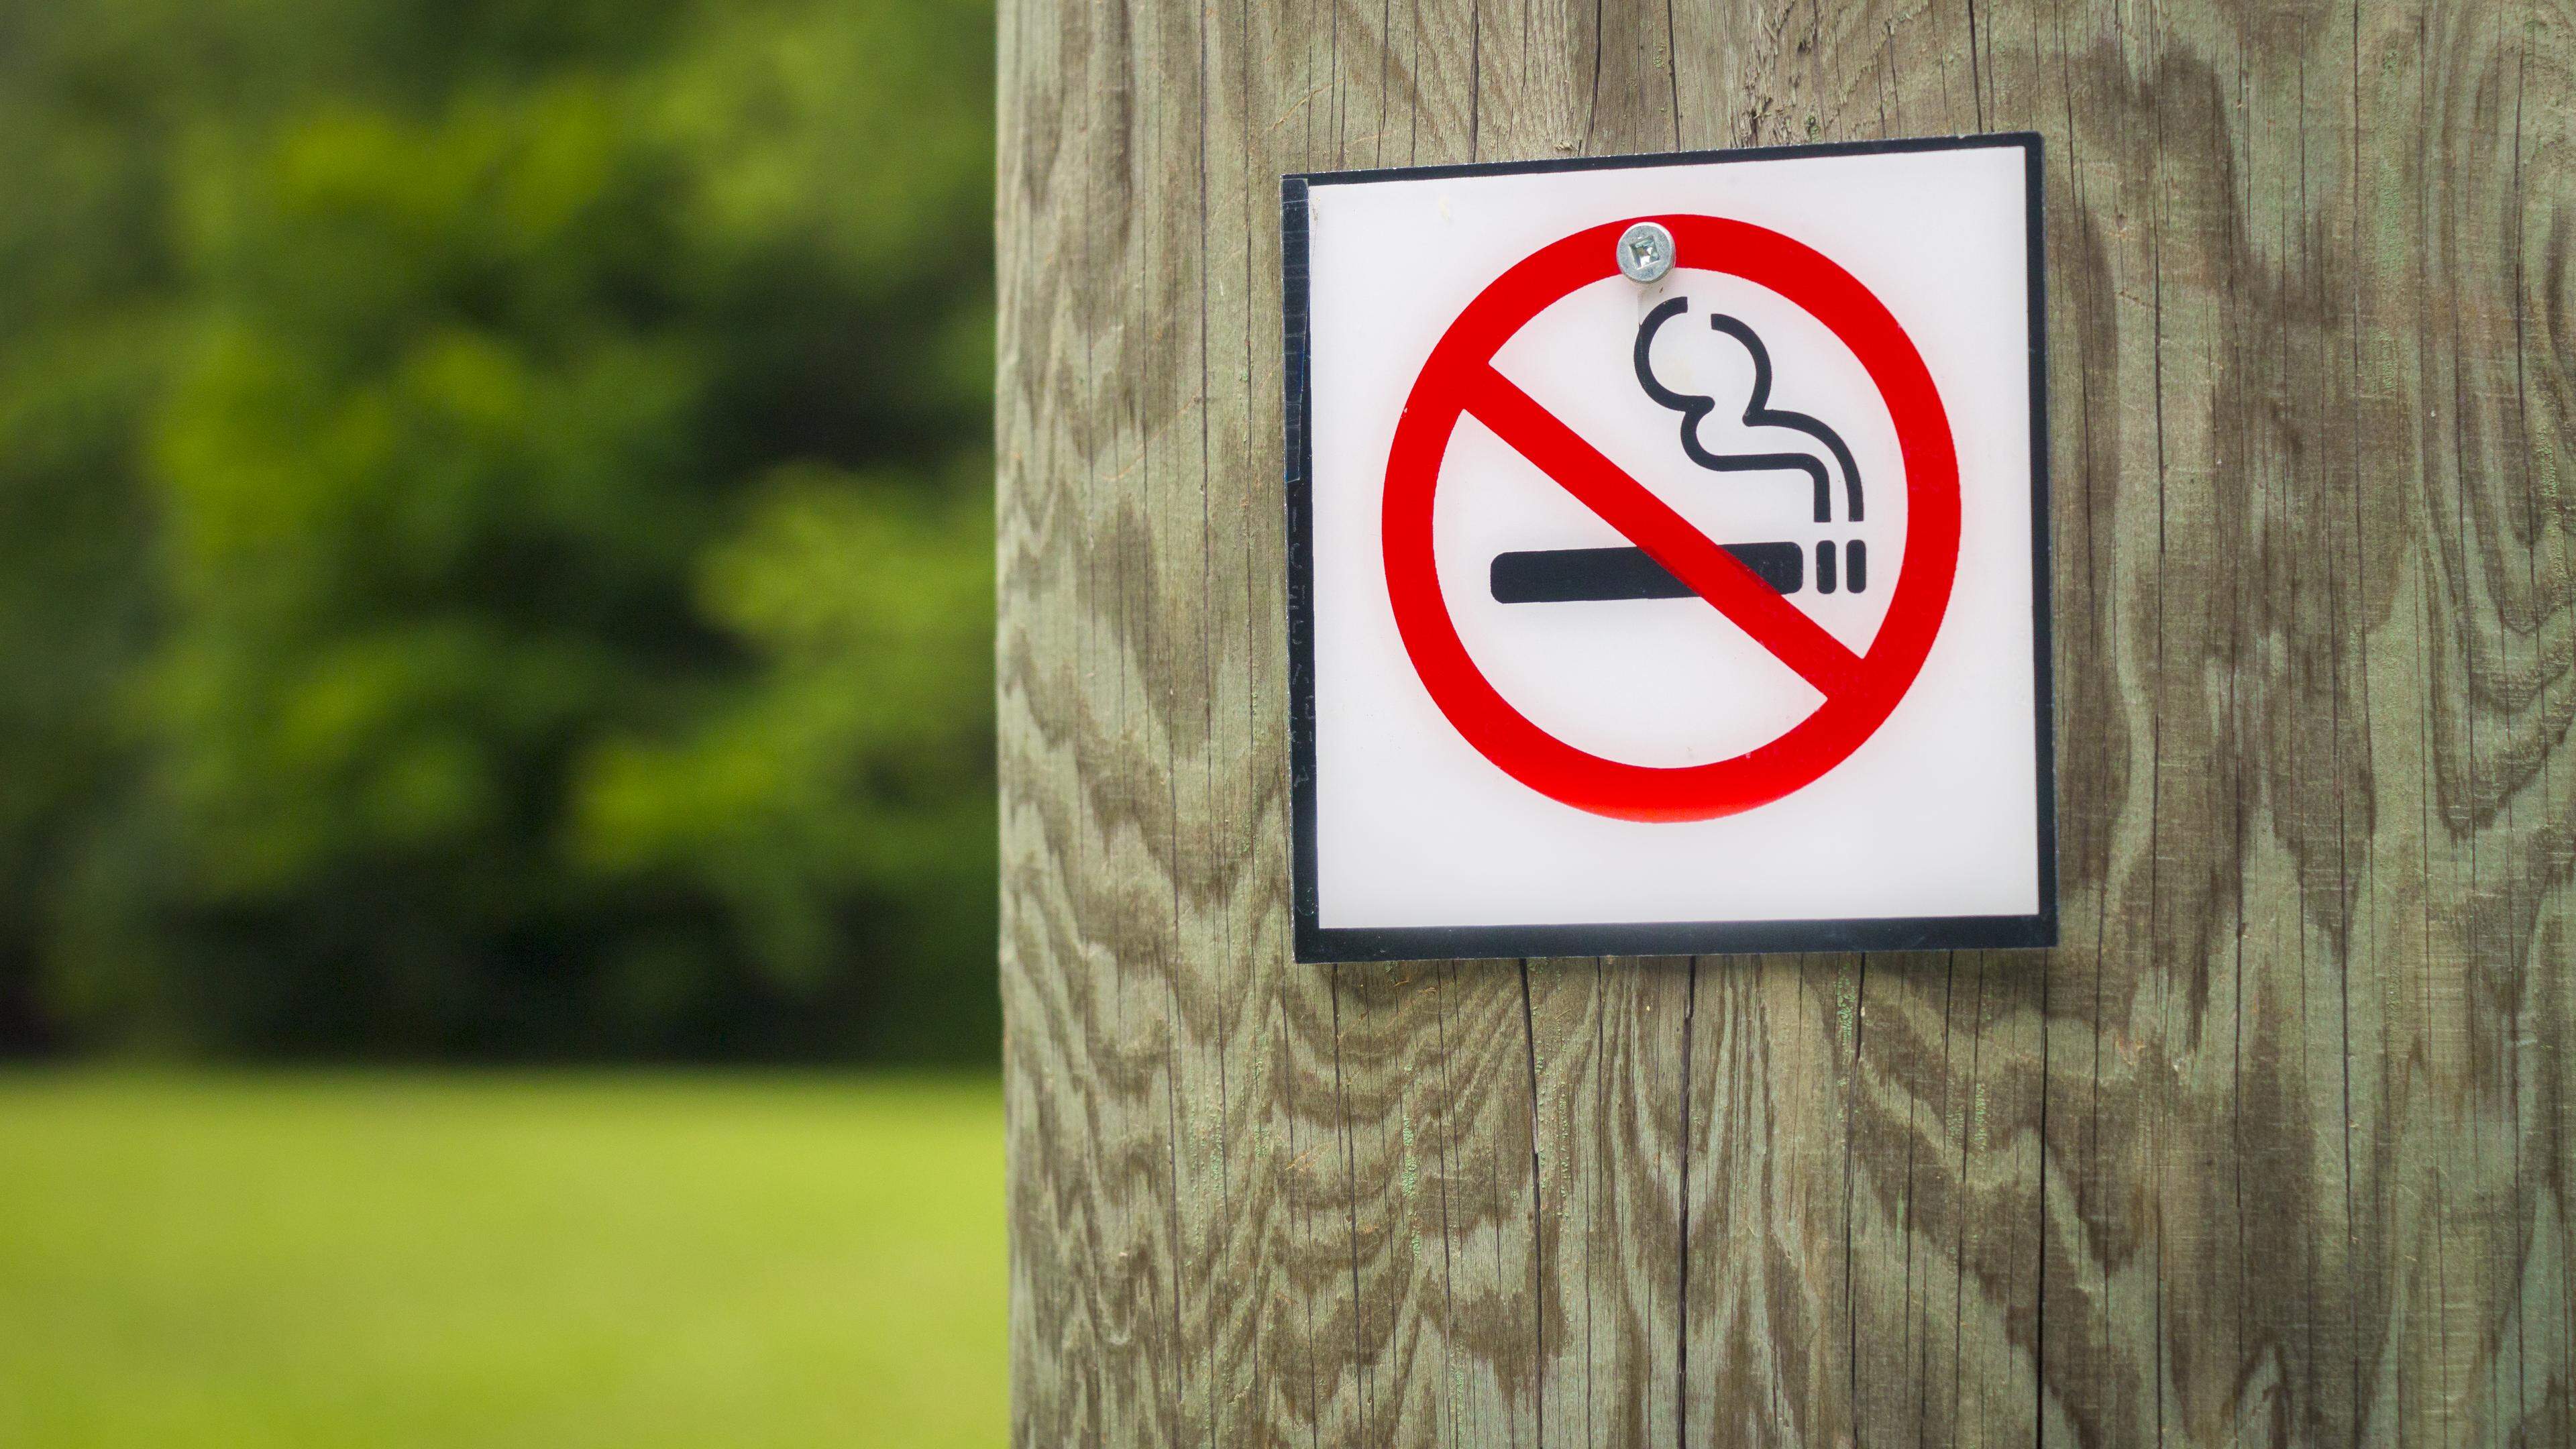 No smoking sign, outside on a wooden post.